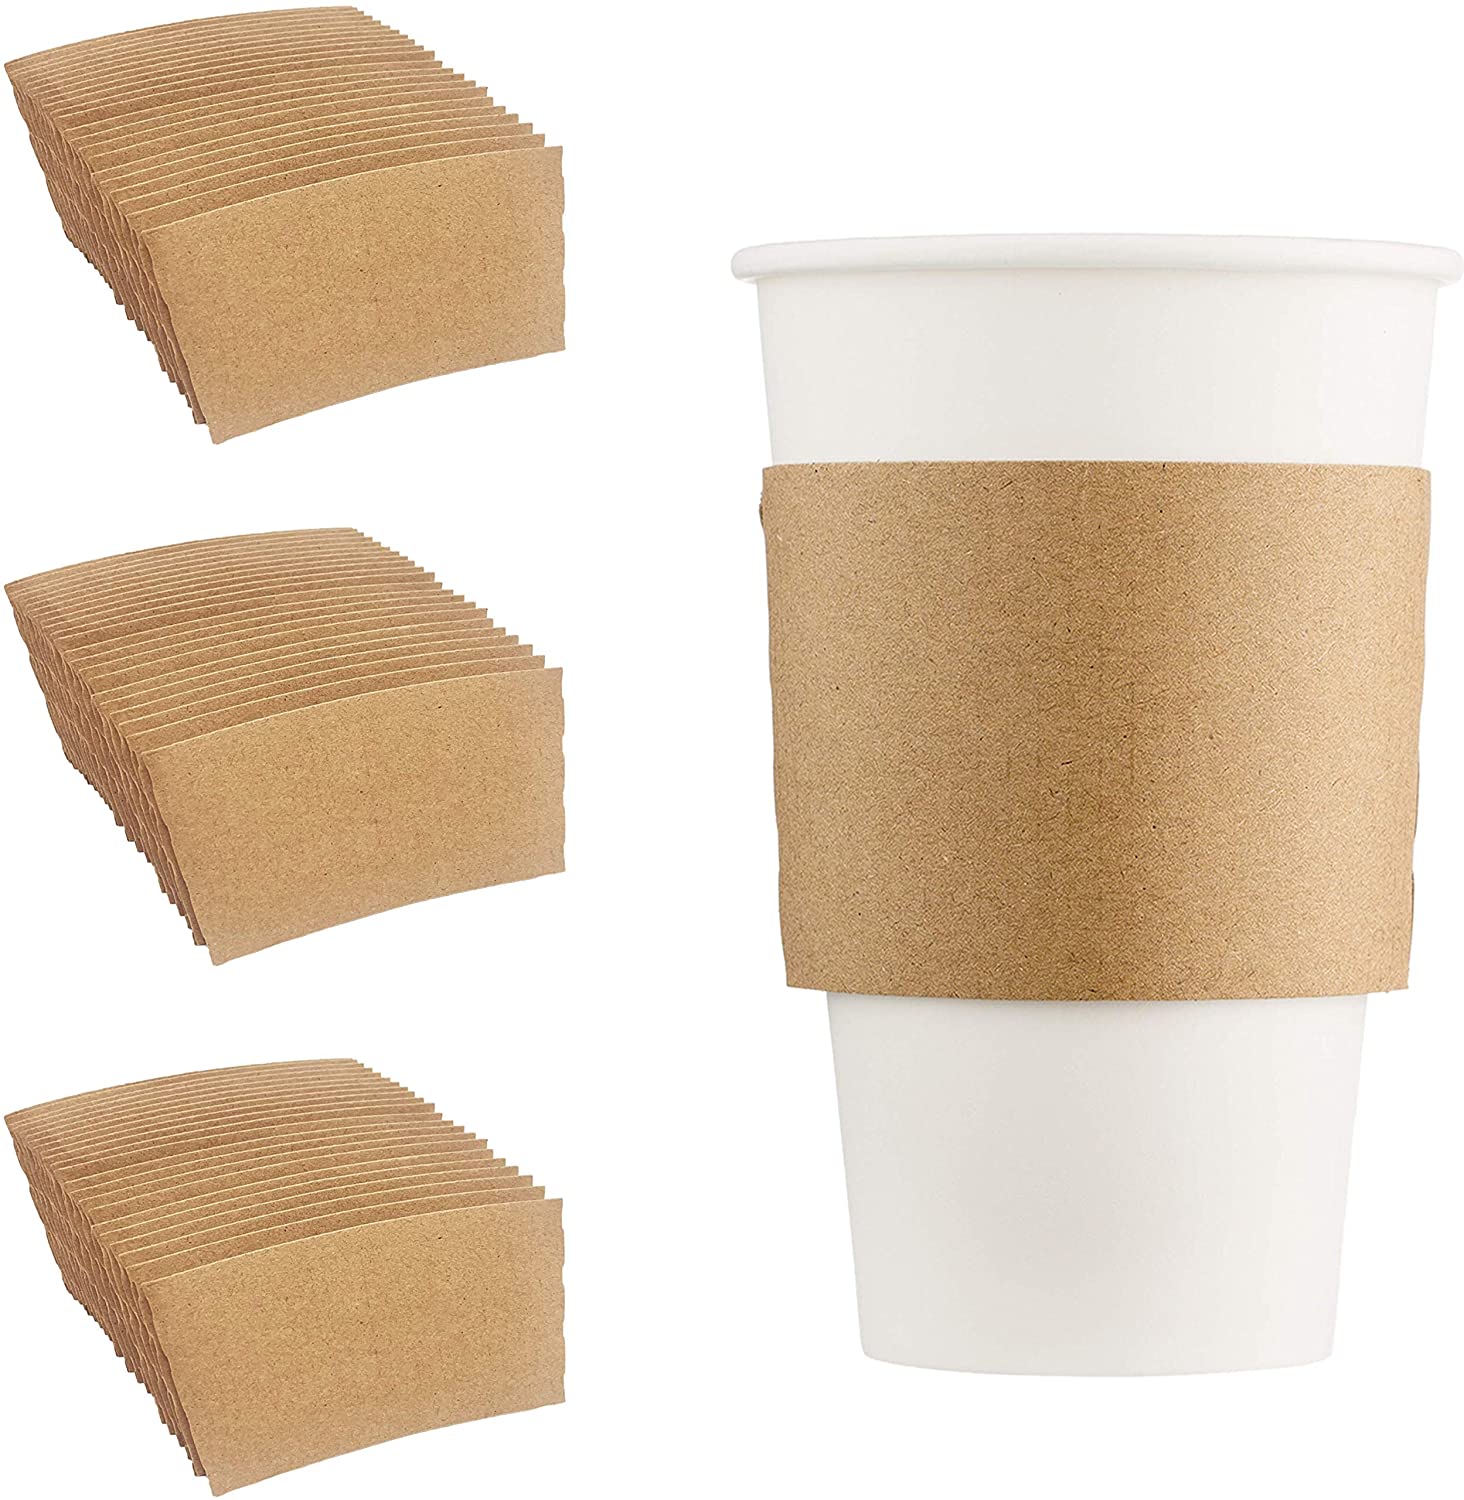 Disposable Customized Heat-resistant Ironing Cup Holder Coffee Paper C –  Fastfoodpak